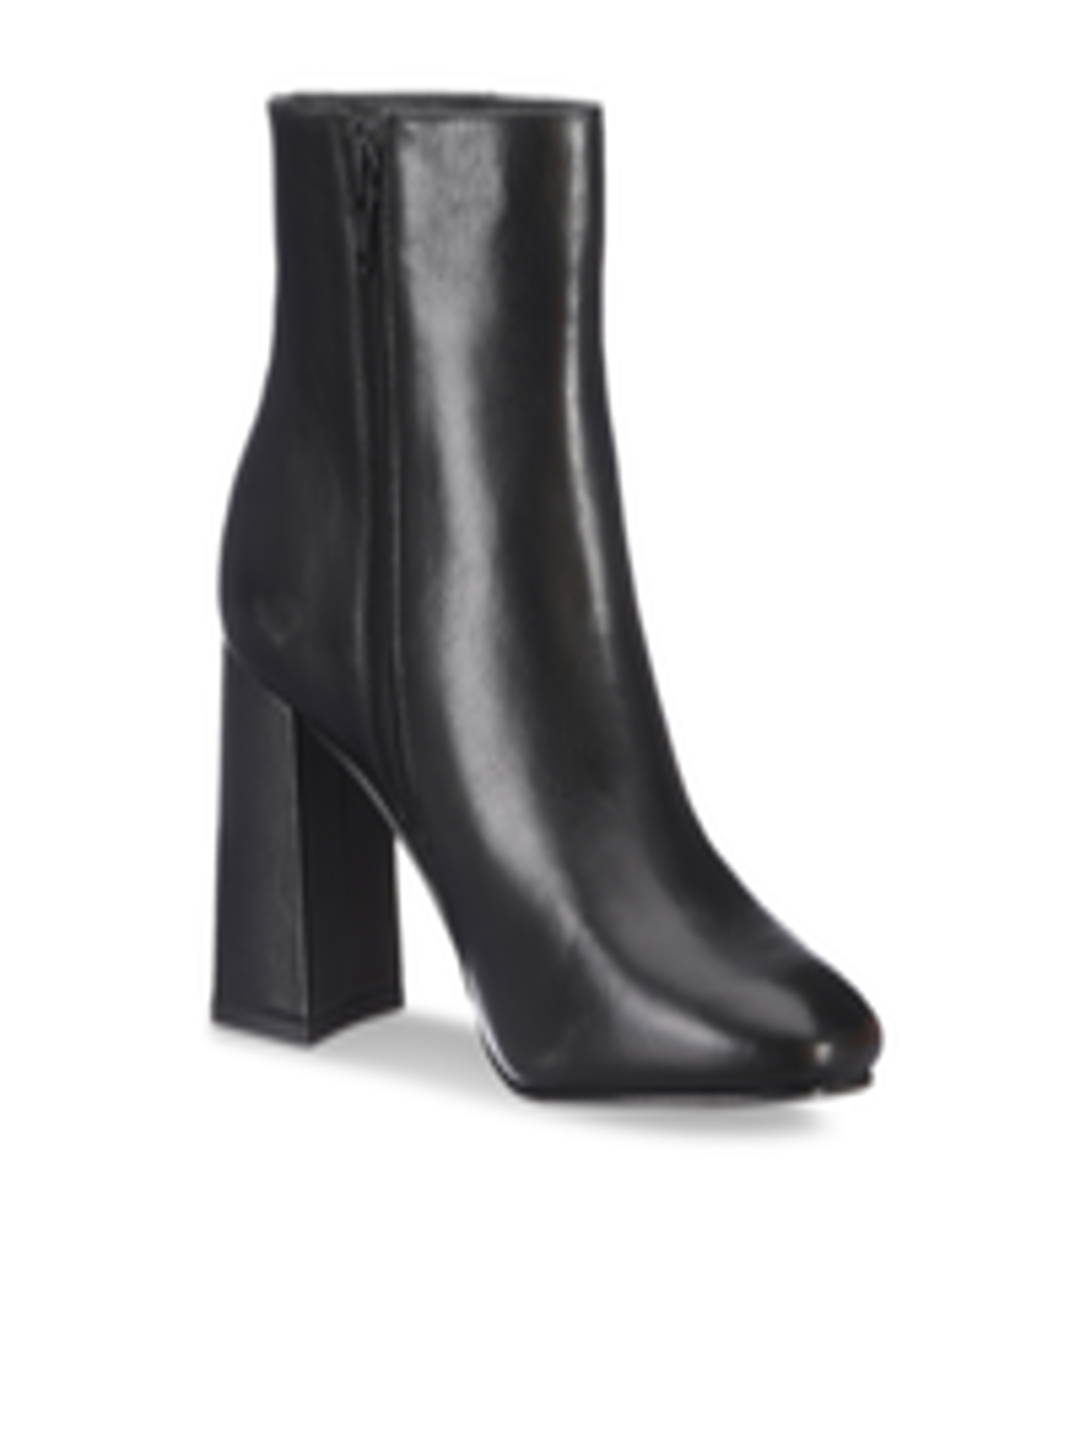 Buy Saint G Black Leather Ankle Boots - Boots for Women 5680542 | Myntra